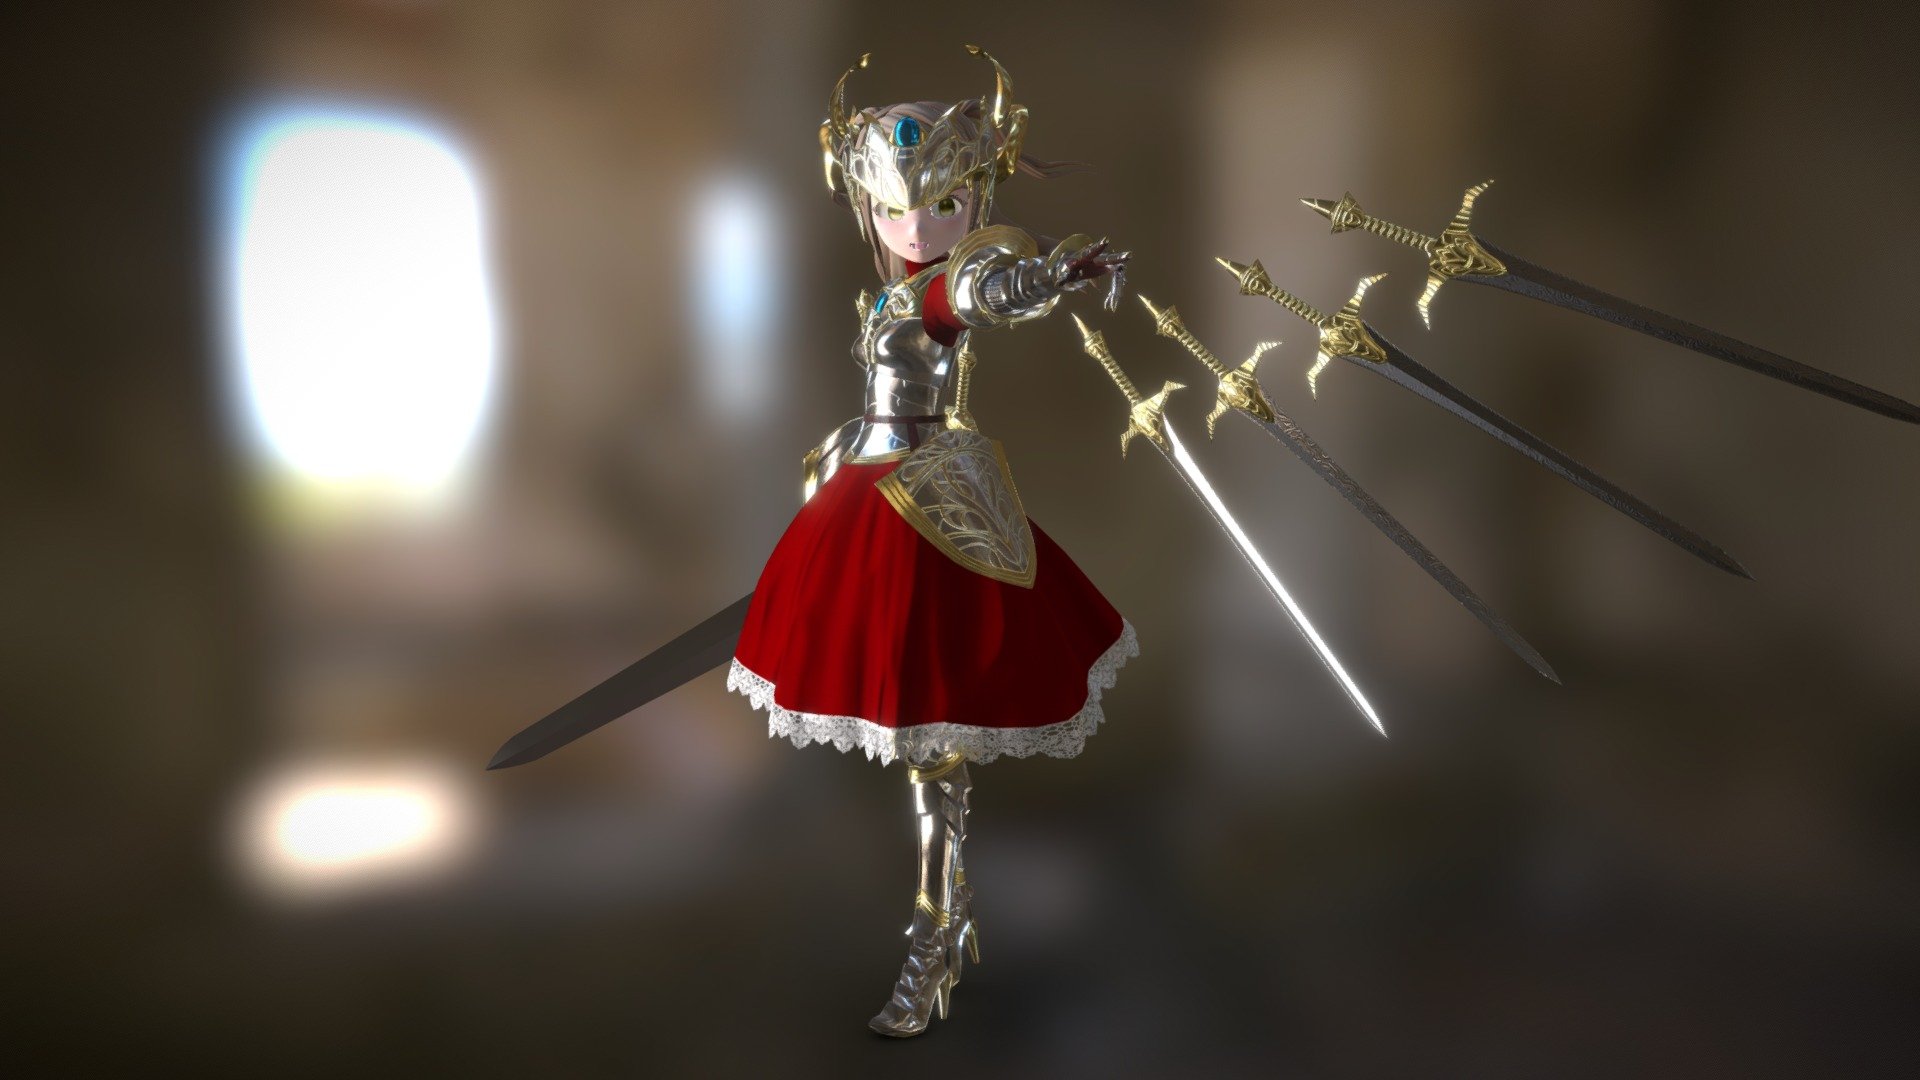 She is Megidna, created as an avatar for VRChat. 
“Dragon-Armed Knightess” are use magic that use dragon’s blood as a source of power and cursed swords tempered with the dragon’s blood as weapons in battle.

この「竜装の姫騎士メギドナ」はVRChat用アバターとして制作しました。
彼女は竜の血を媒介とした魔法と、竜の血で焼き入れされた魔剣を武器として戦いに身を投じる「竜装騎士」です。 - Dragon-Armed Knightess Megidna - 3D model by scramasax 3d model